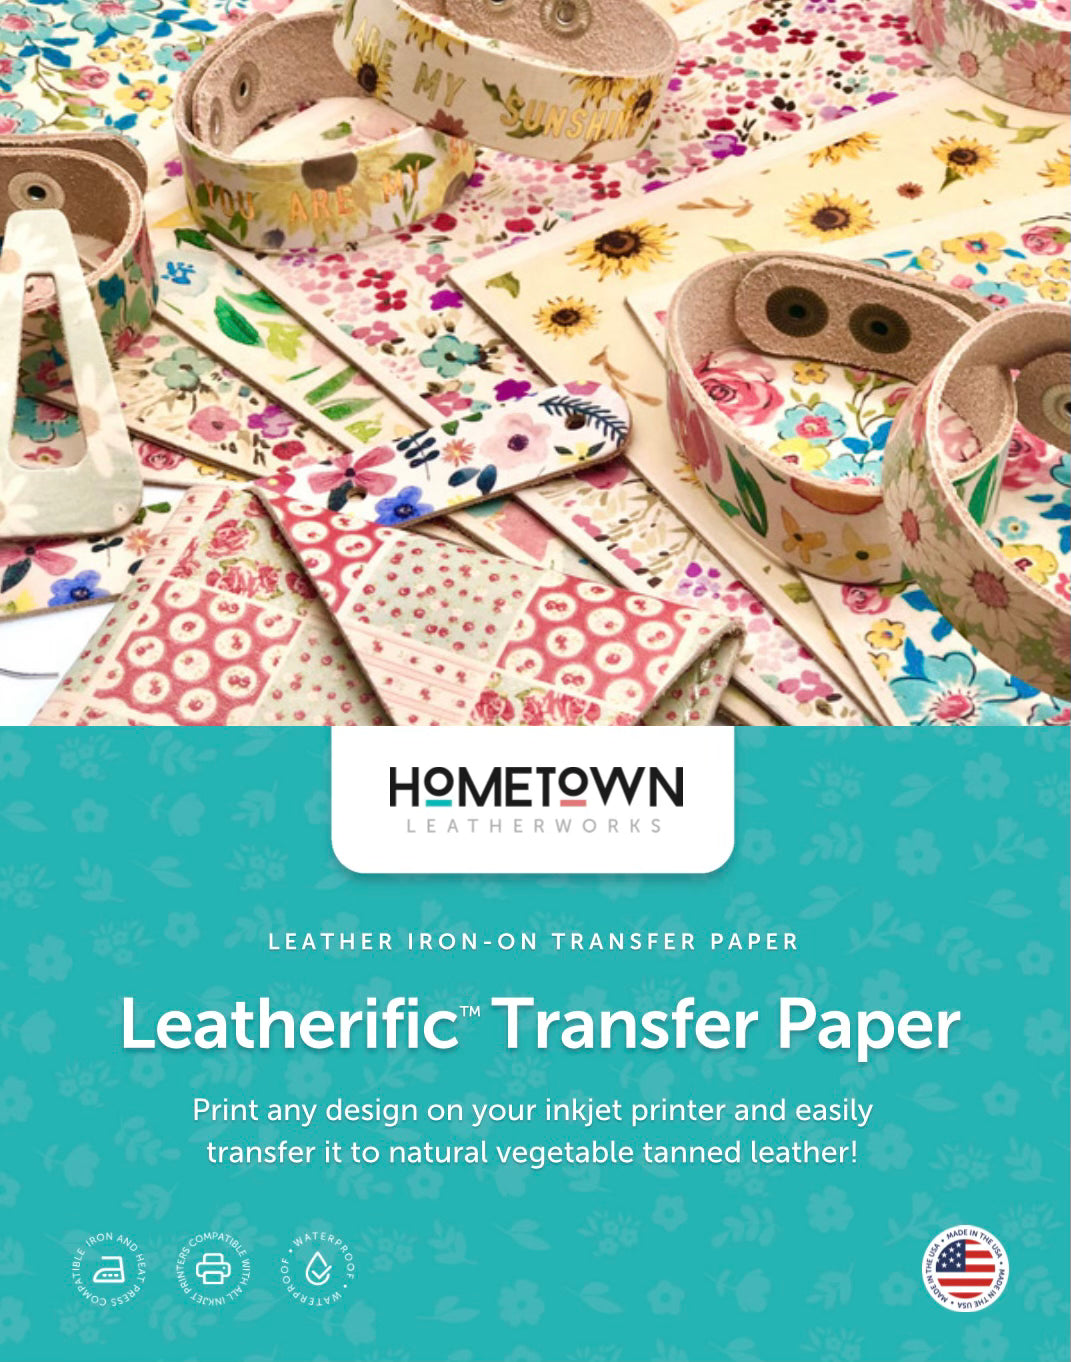 Leatherific Transfer Paper and Veg Tan Leather Bundle 8 1/2" By 11"